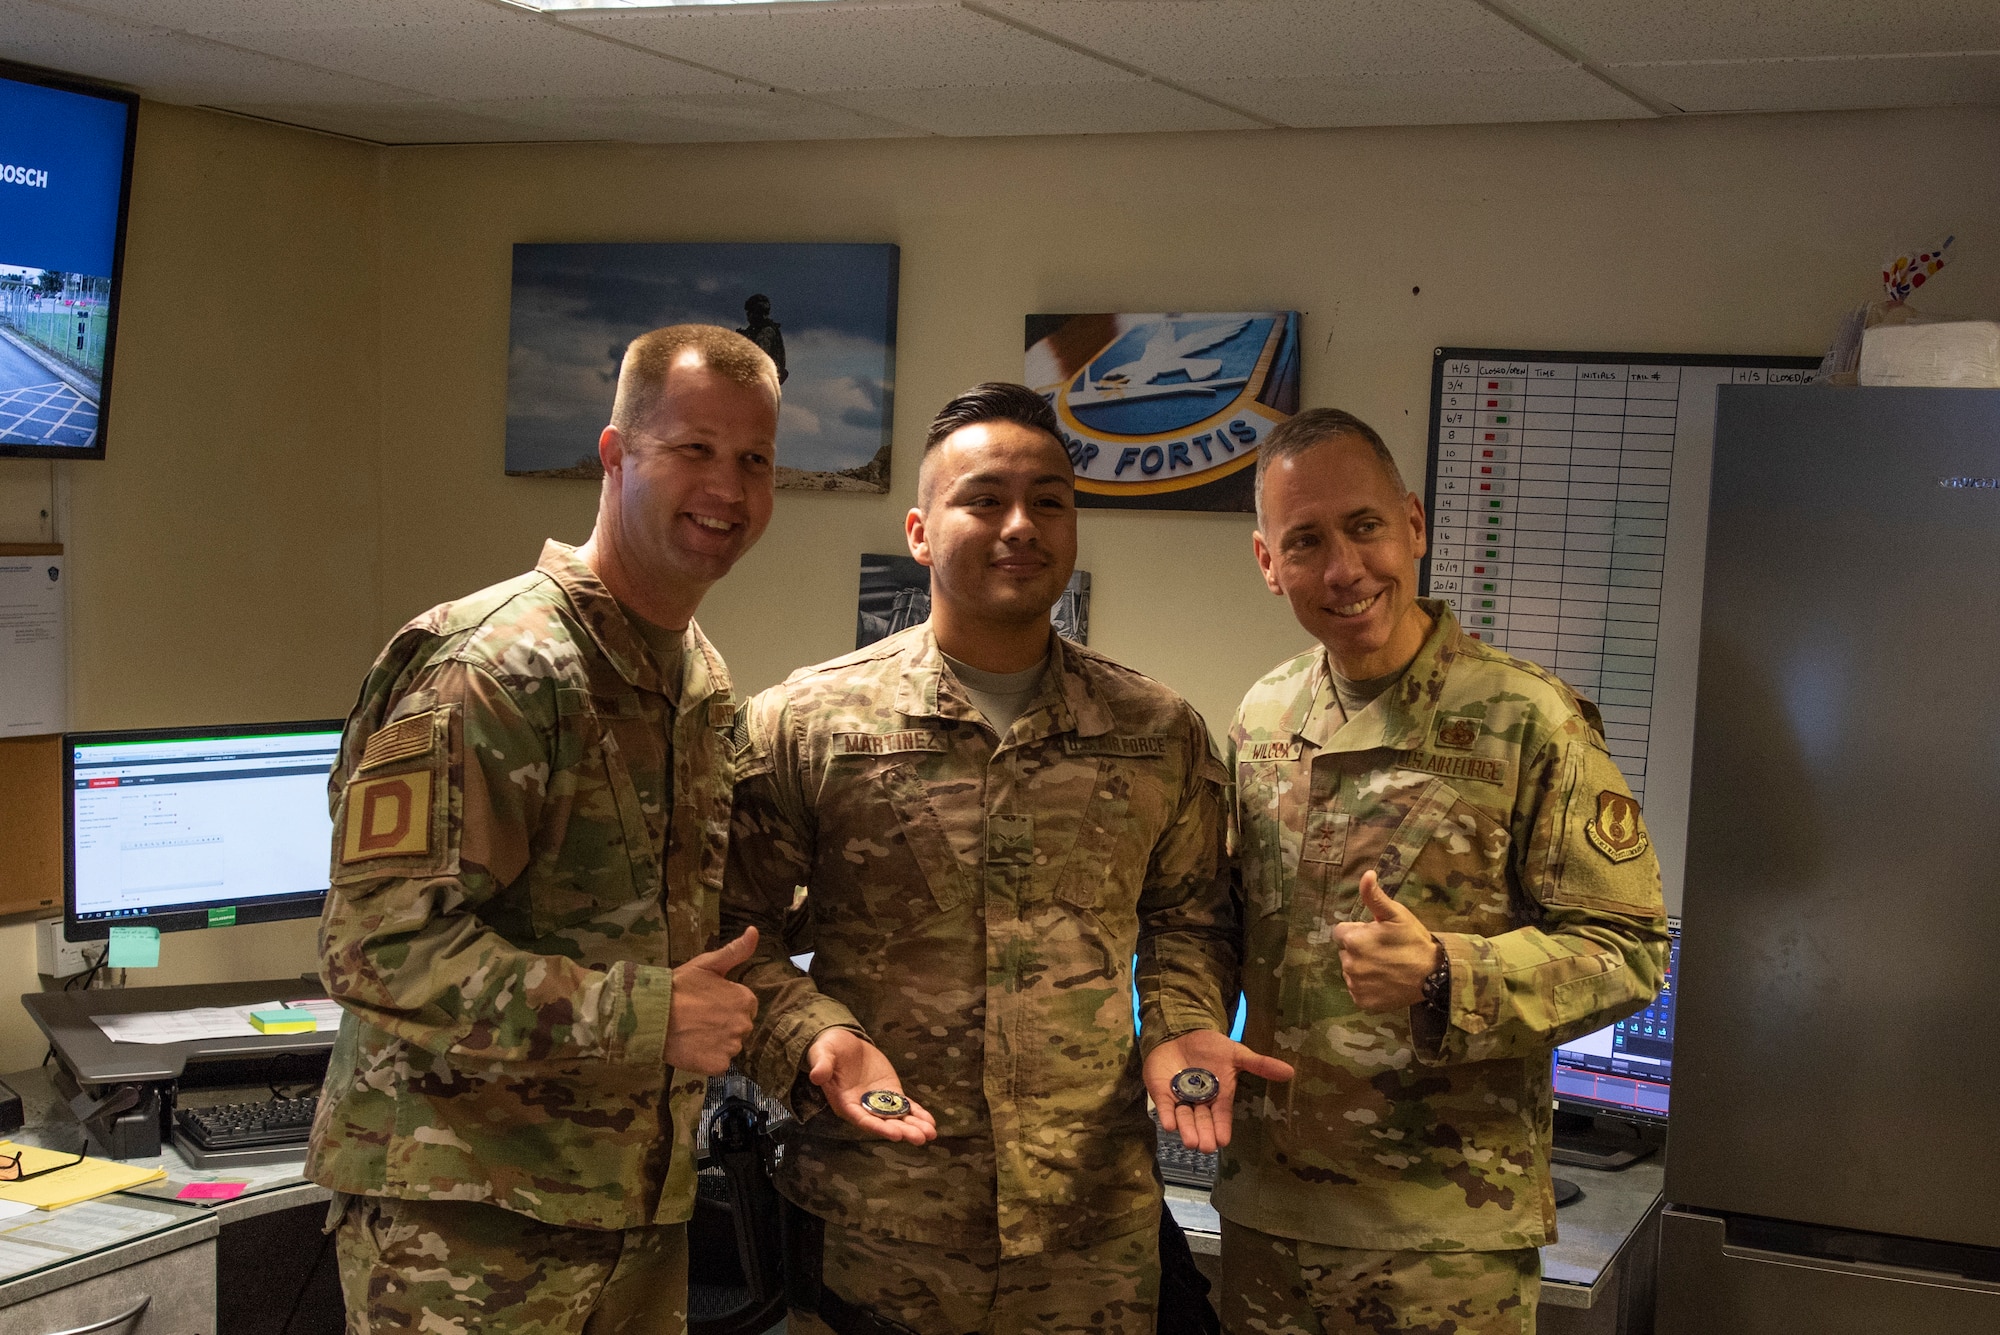 Maj. Gen. John Wilcox, Air Force Installation and Mission Support Center commander, and Chief Master Sgt. Edwin Ludwigsen, AFIMSC command chief master sergeant, pose for a photo with Airman Anthony Martinez, 100th Security Forces Squadron base defense operations center controller, after coining him Nov. 22, 2019, at RAF Mildenhall, England. The AFIMSC provides installation and mission support that enables Team Mildenhall to complete its varied mission sets.  (U.S. Air Force photo by Airman 1st Class Joseph Barron)